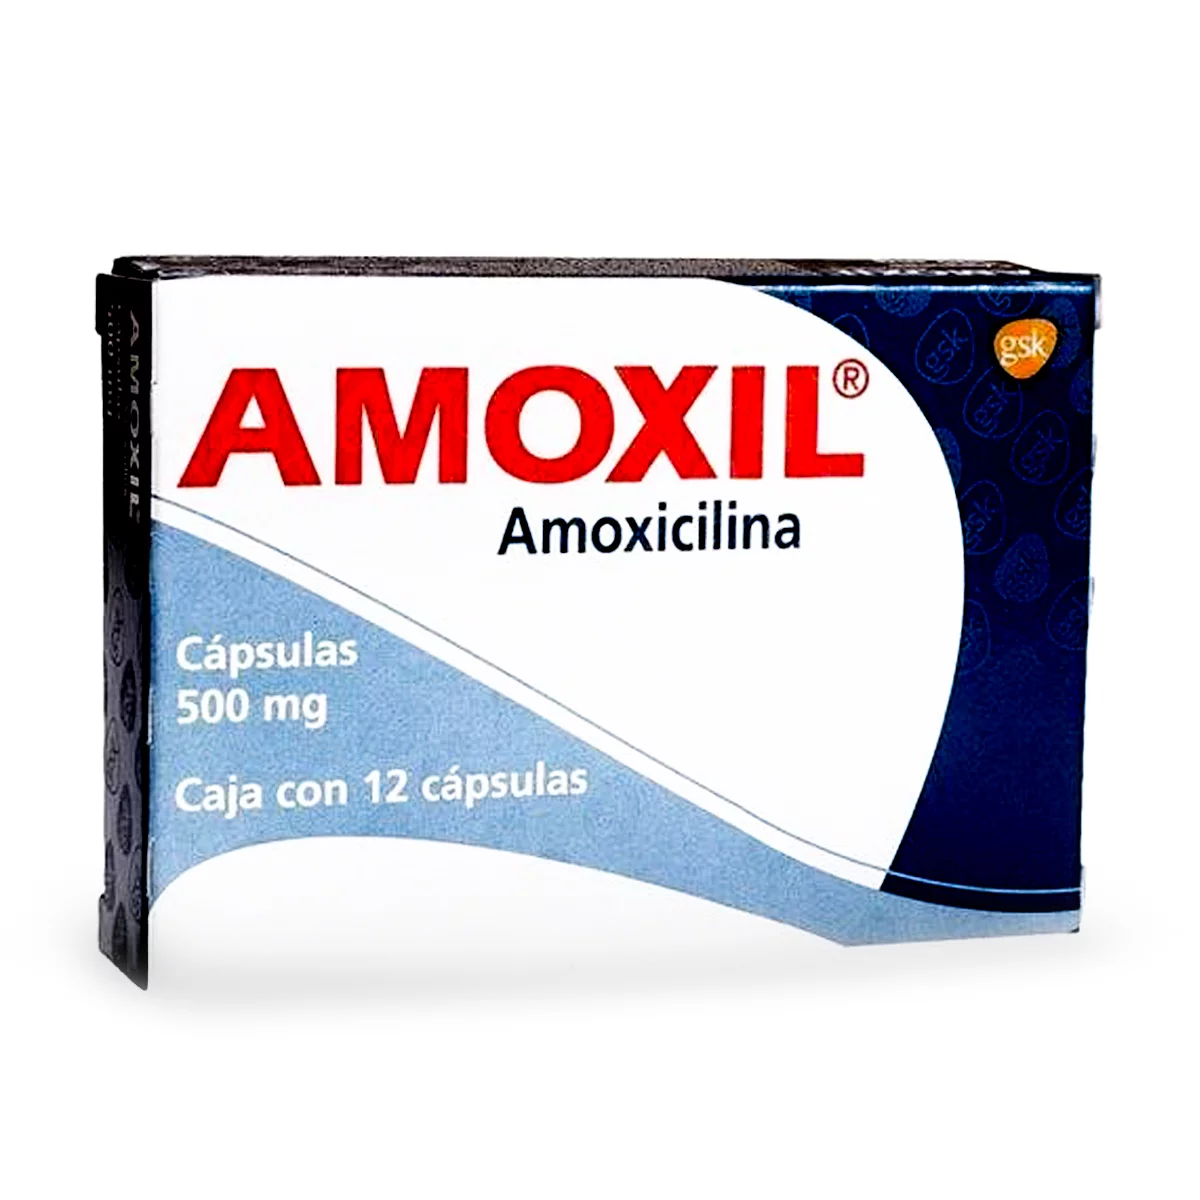 Buy Amoxil Amoxicillin 500 mg 12 tablets For Sale Online at Cheap Rates